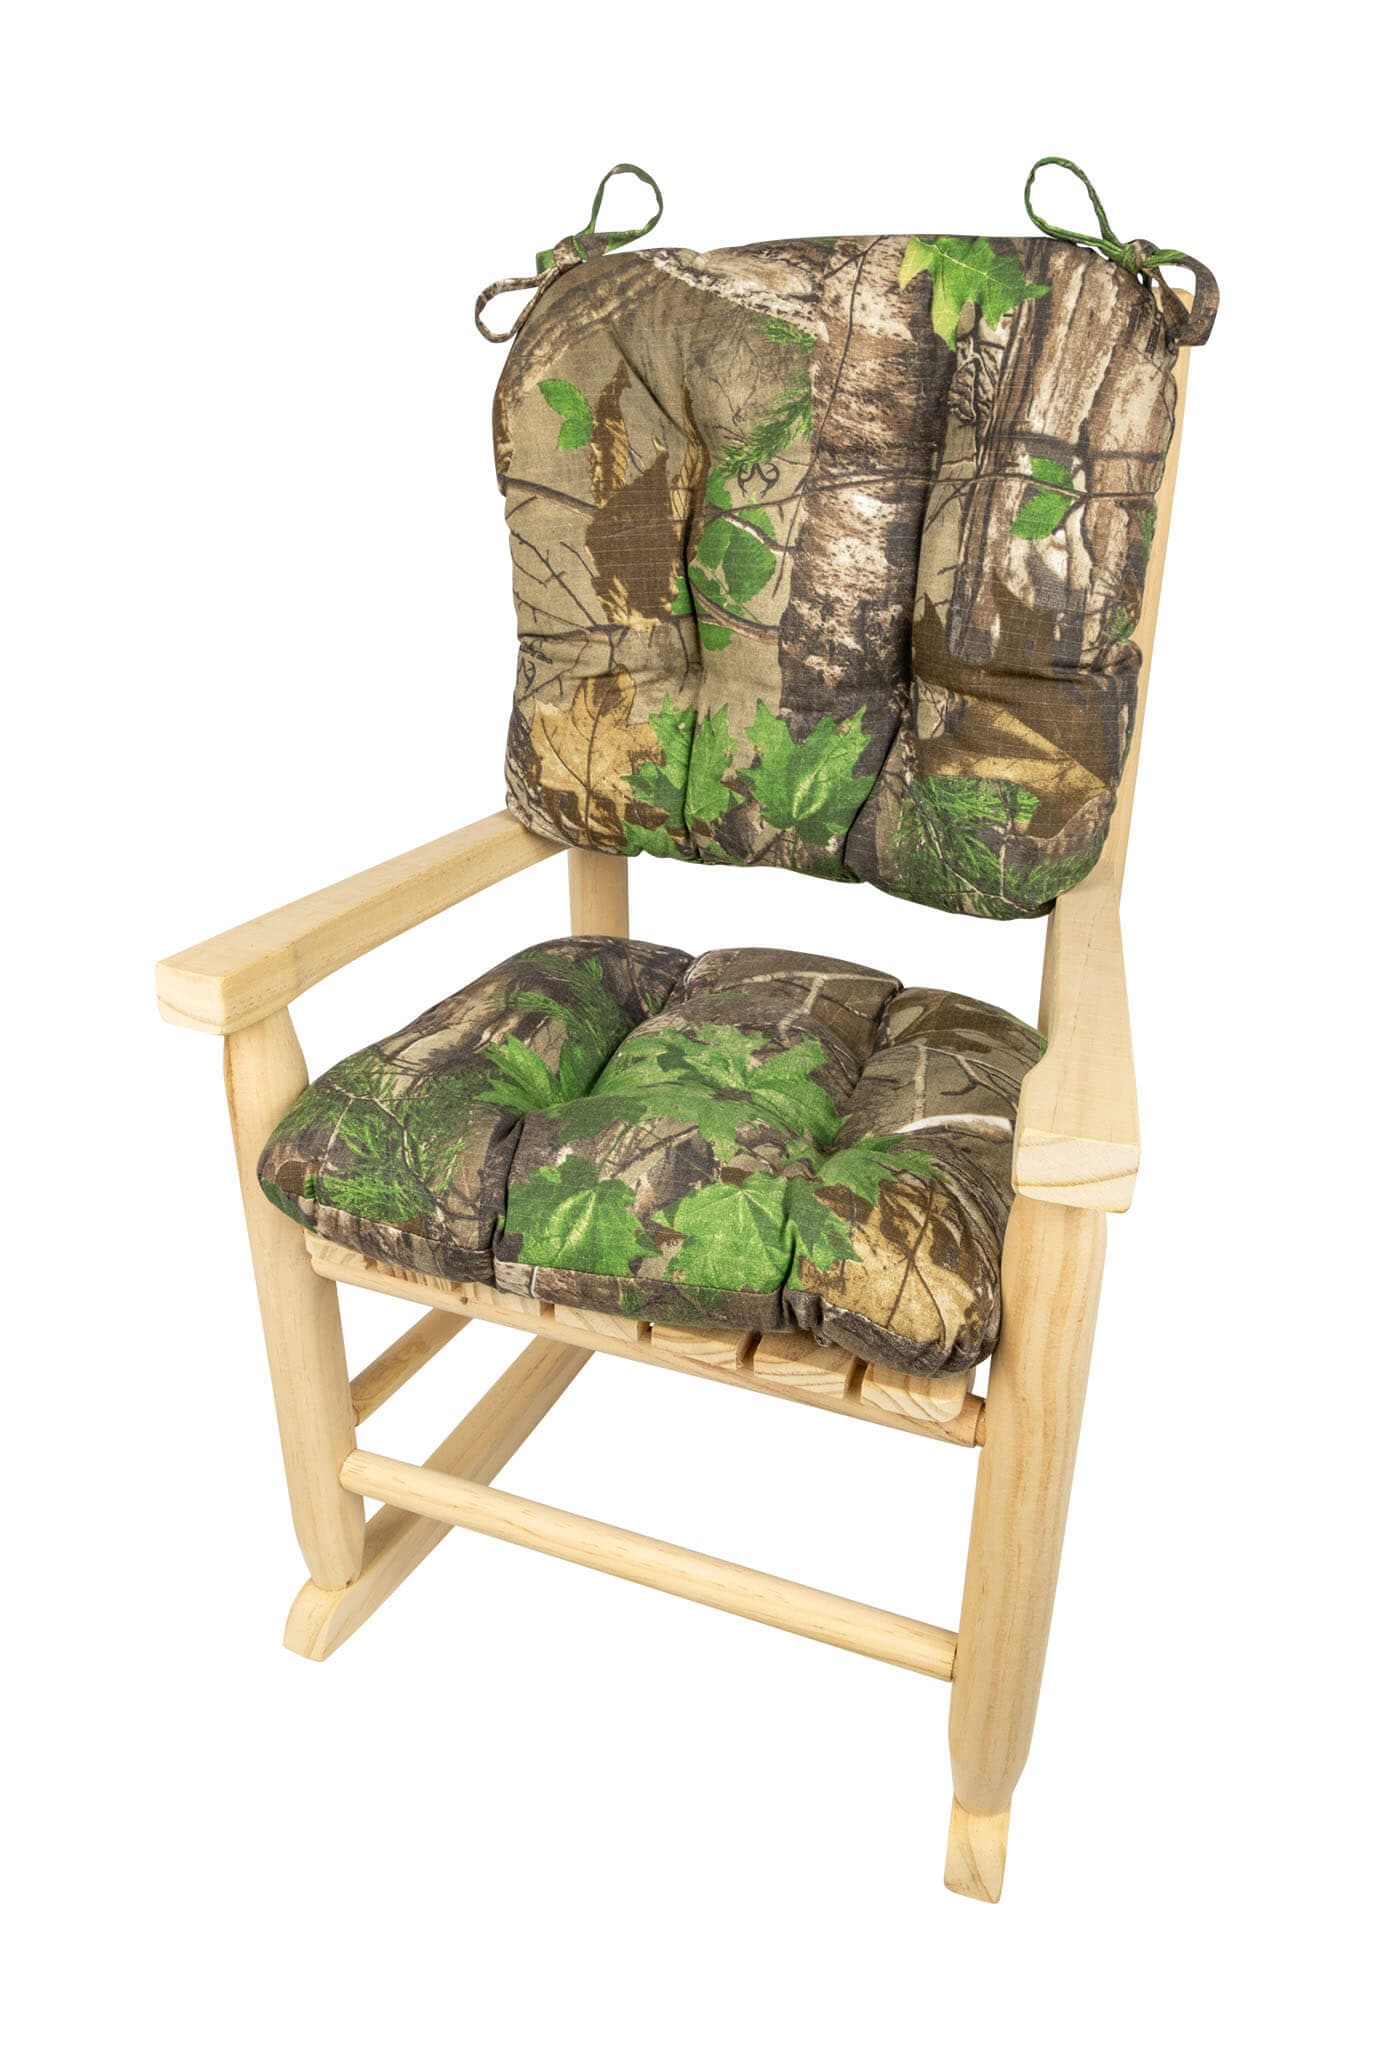 Child Rocking Chair Cushions - Realtree Xtra Green (R) Camo - Made in USA - Machine Washable